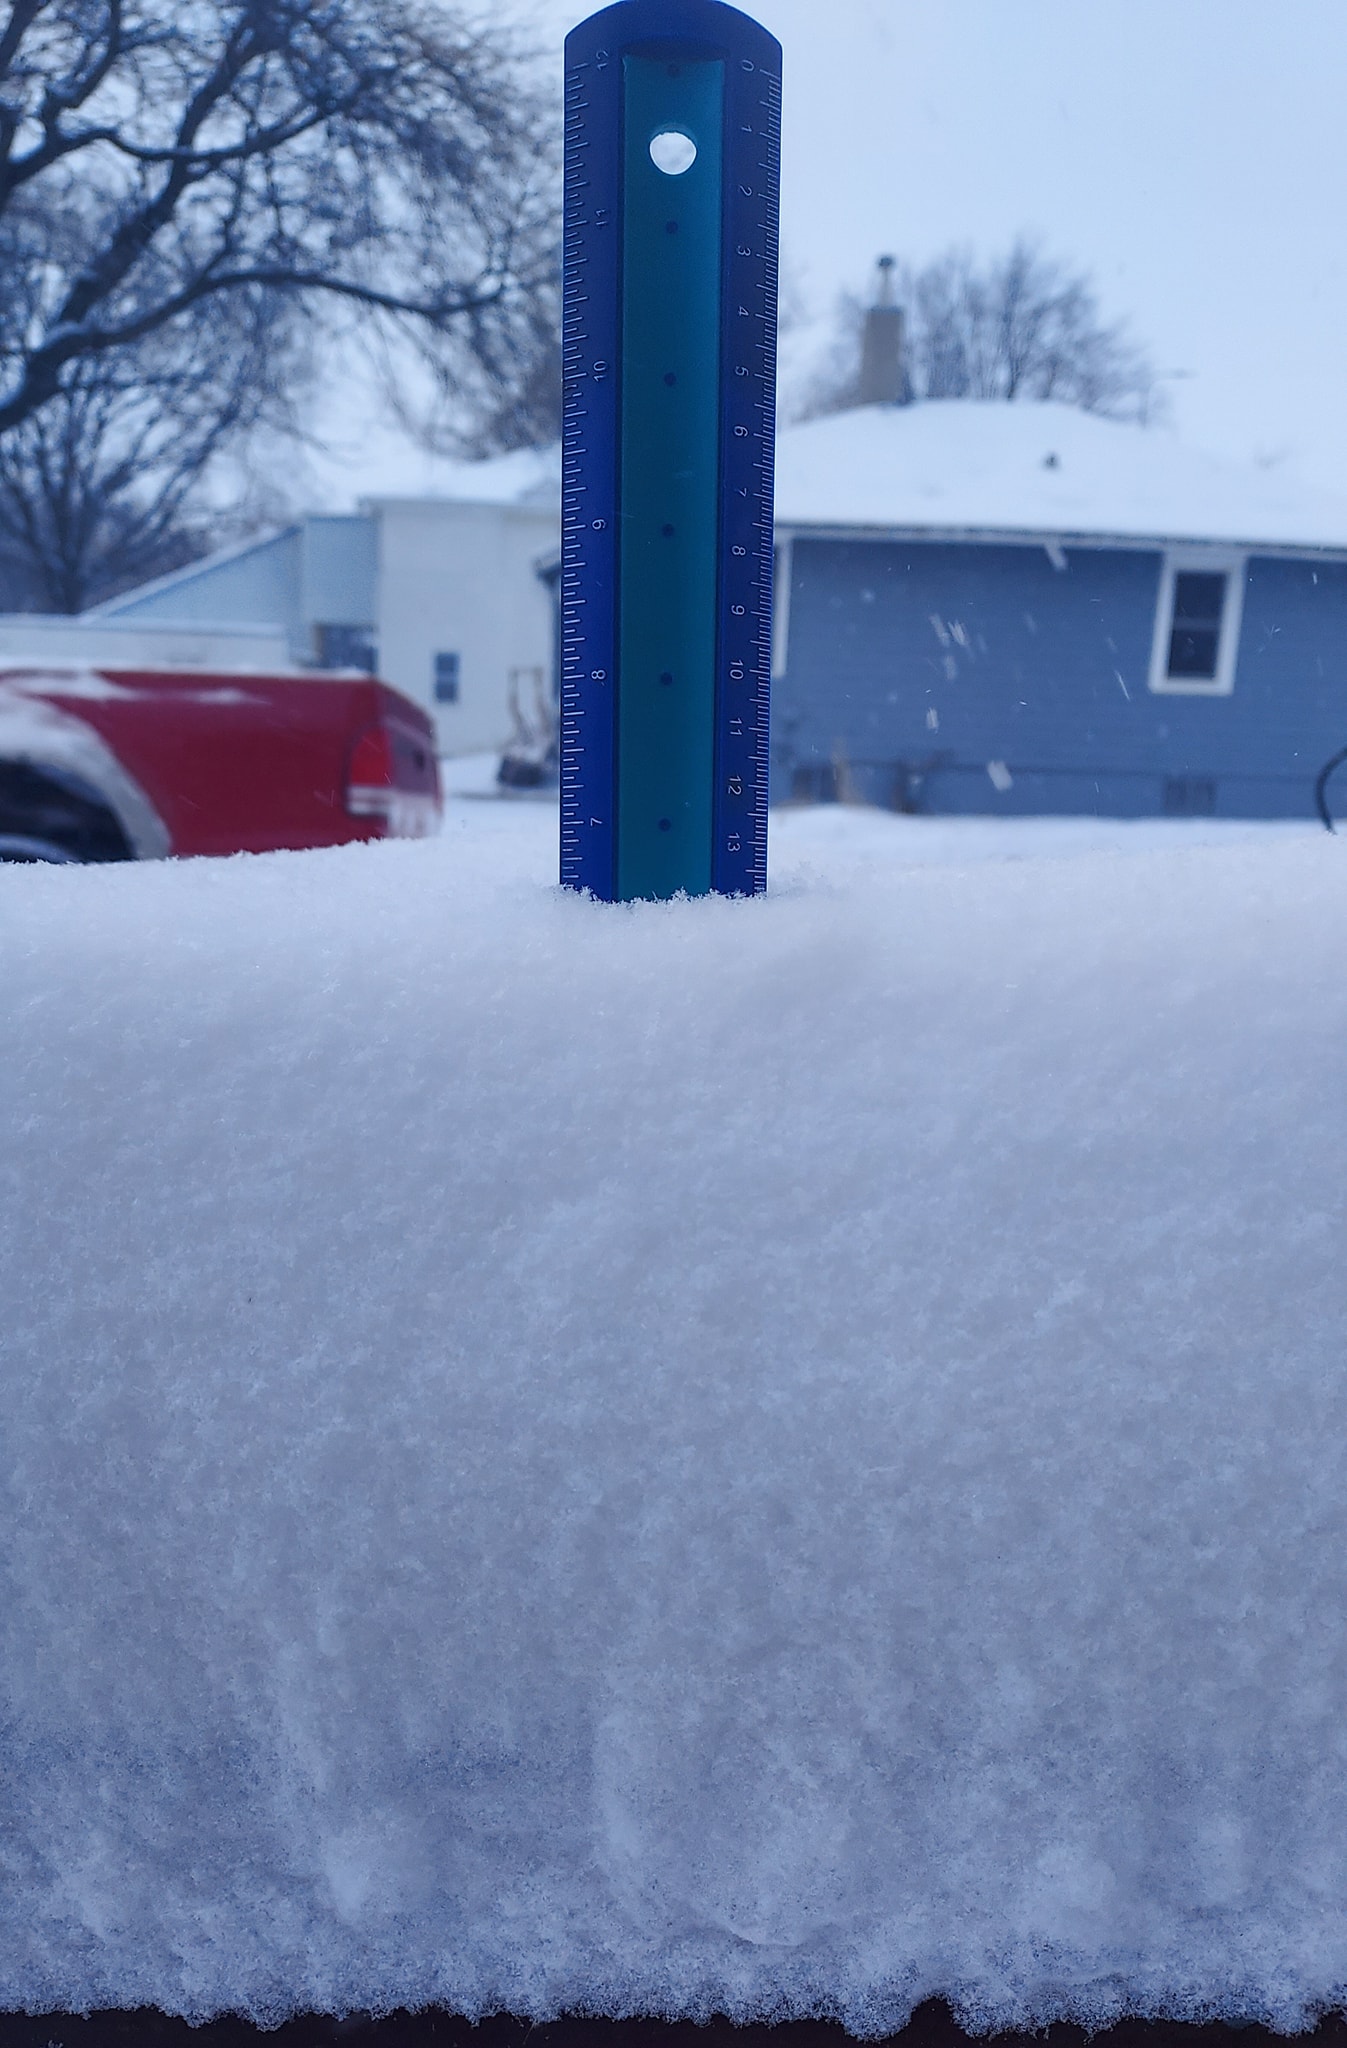 Blue plastic ruler stuck into a snow bank, showing a measurement of 6.5 inches of snow accumulation.